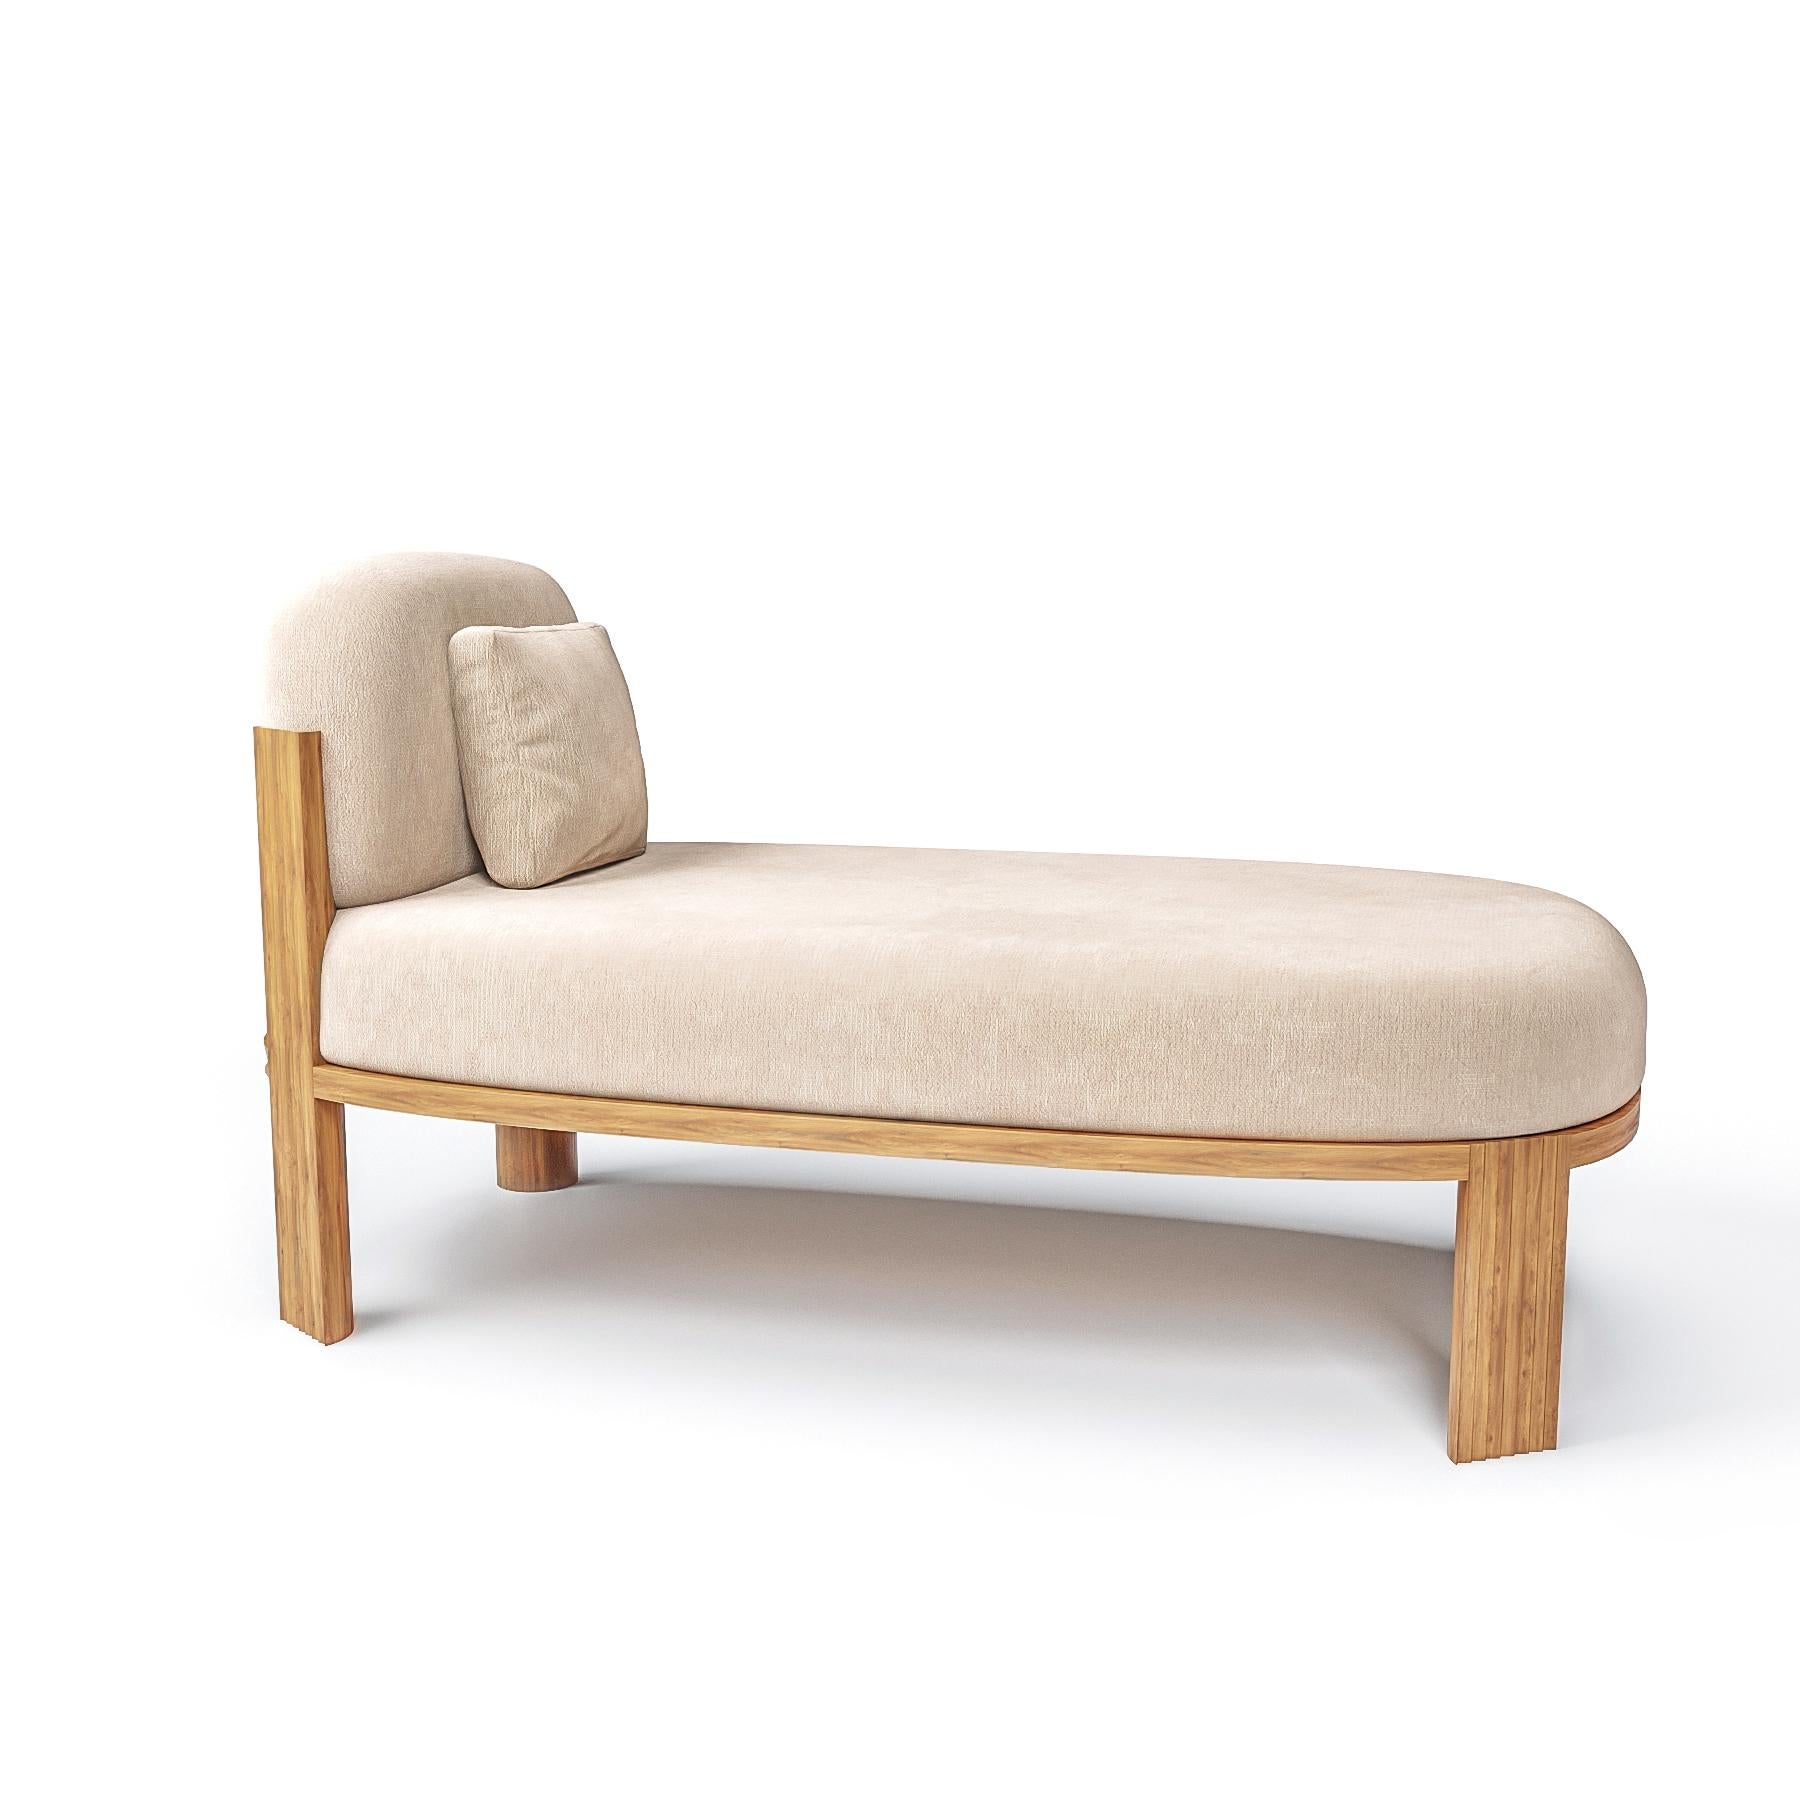 Portuguese Contemporary Modern 111 Daybed in Cream Fabric & Oak Wood by Collector Studio For Sale